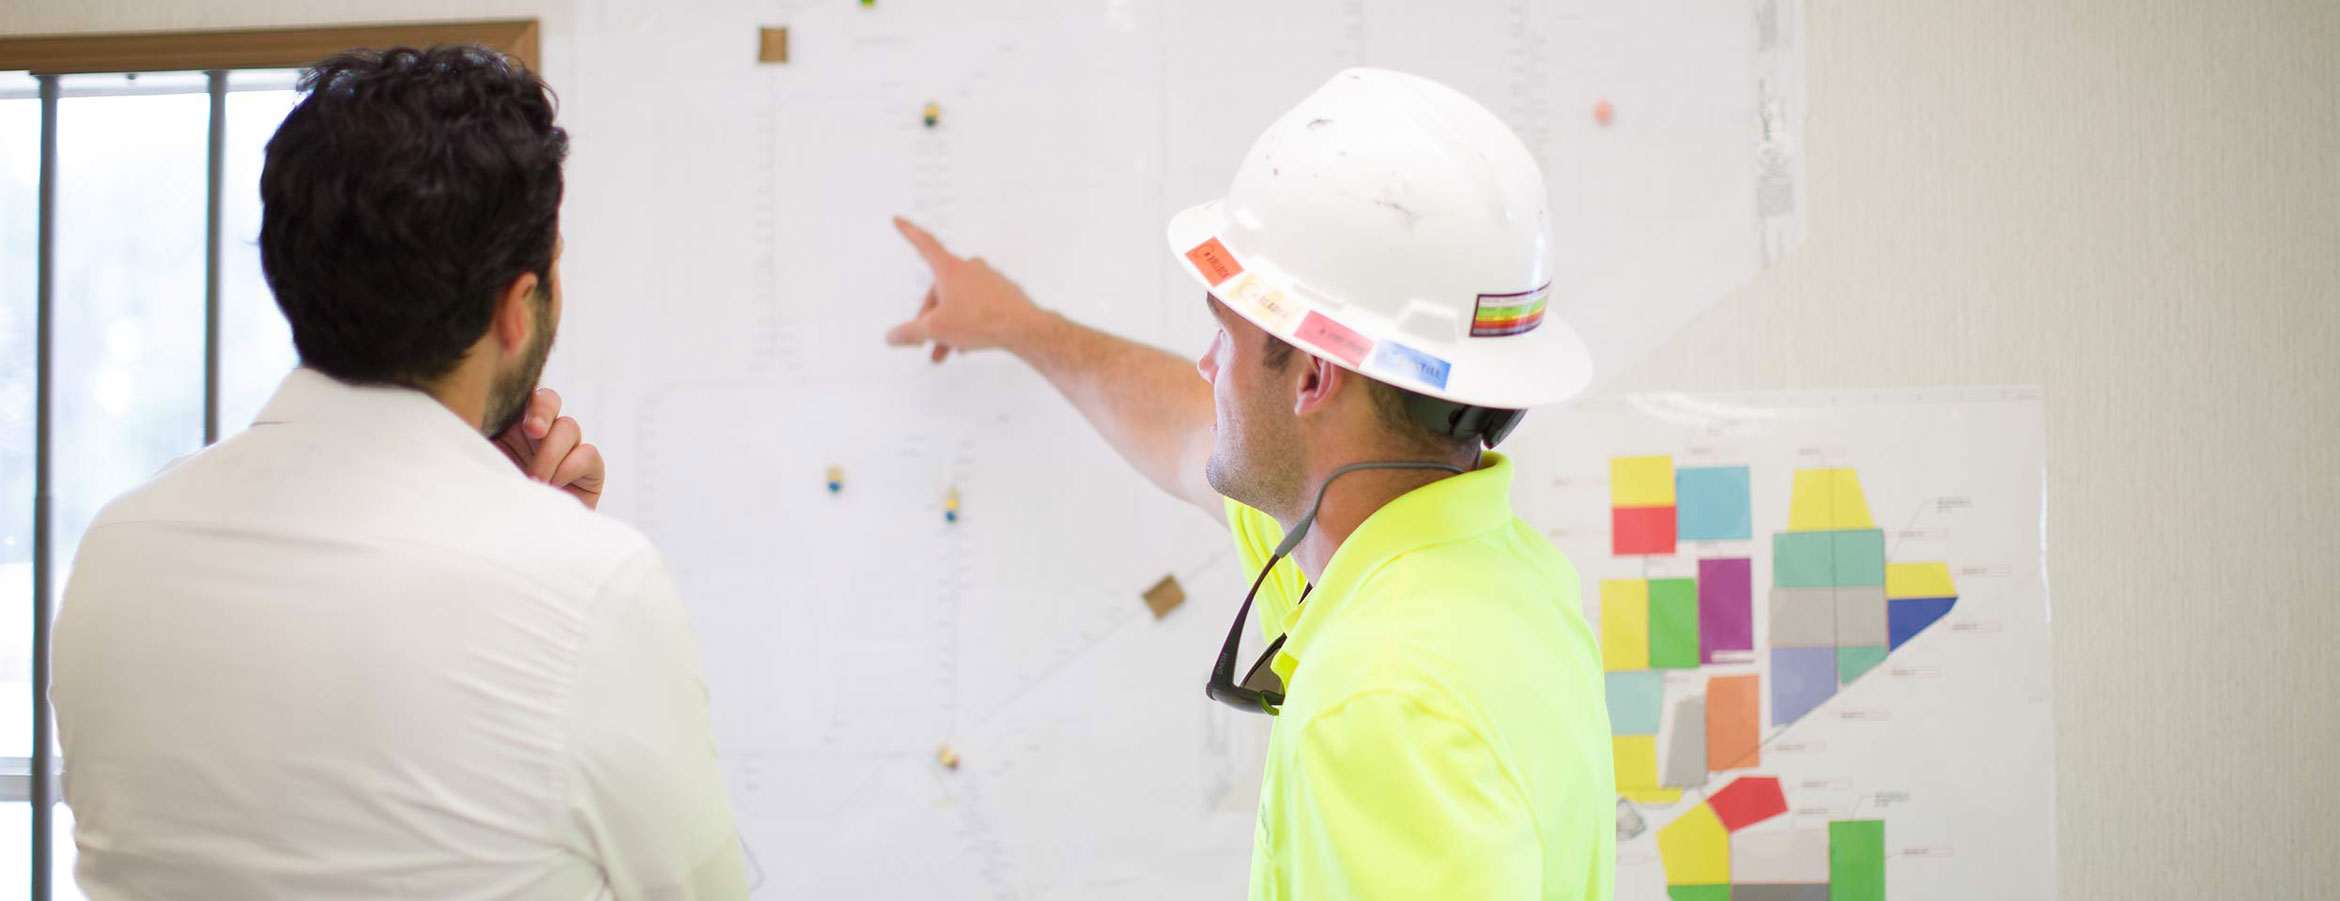 Two employees looking at plans on a wall